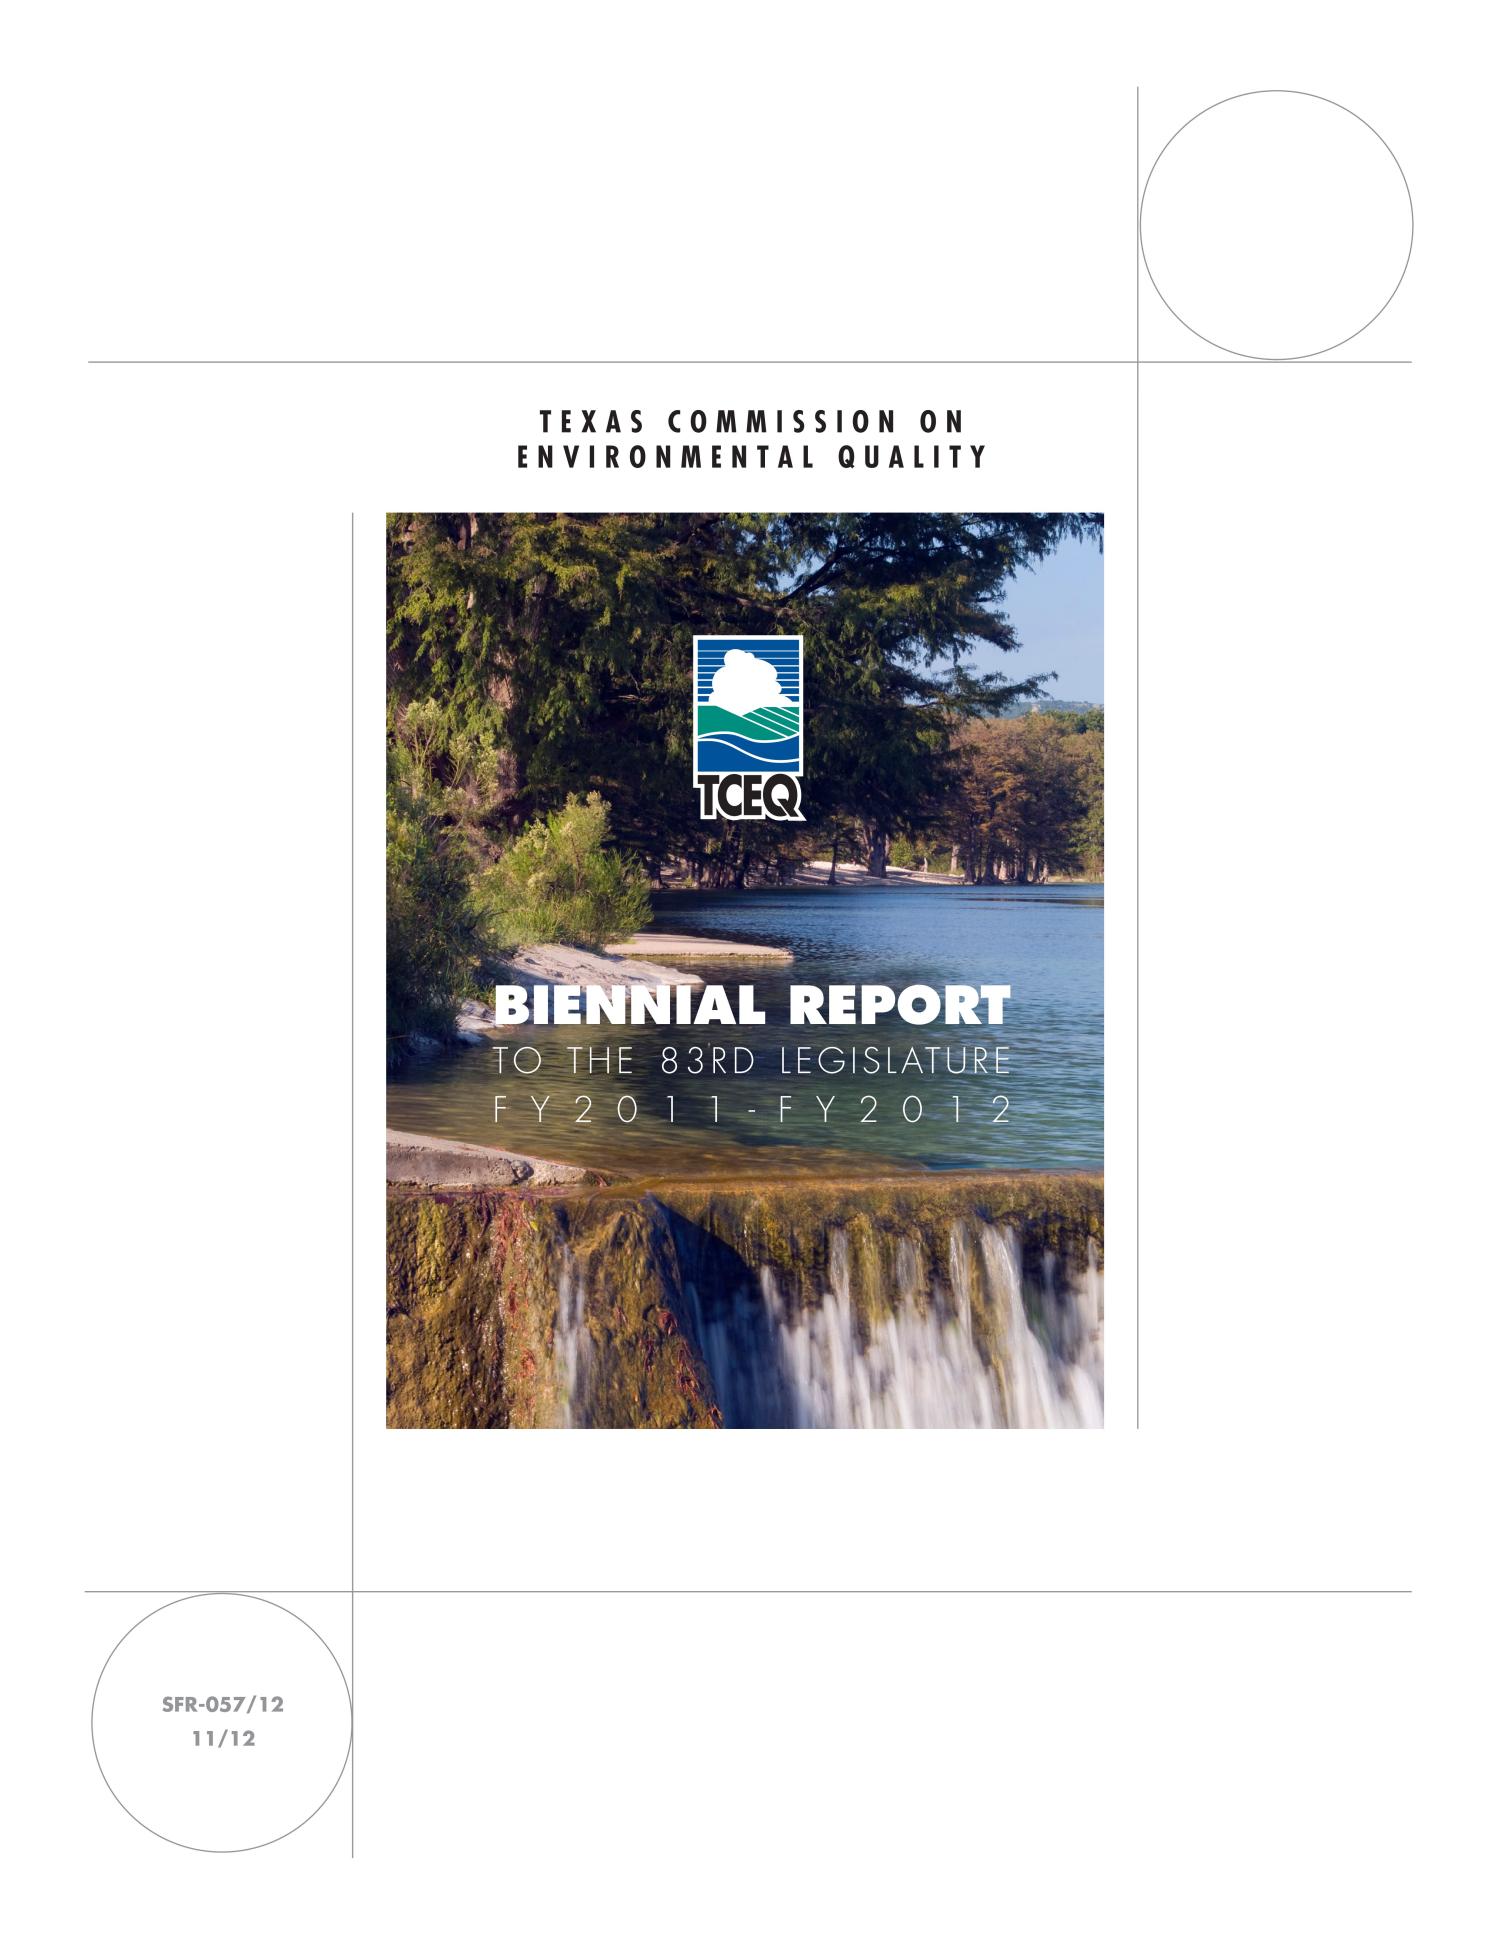 Biennial Report to the 83rd Texas Legislature: Texas Commission on Environmental Quality
                                                
                                                    Title Page
                                                